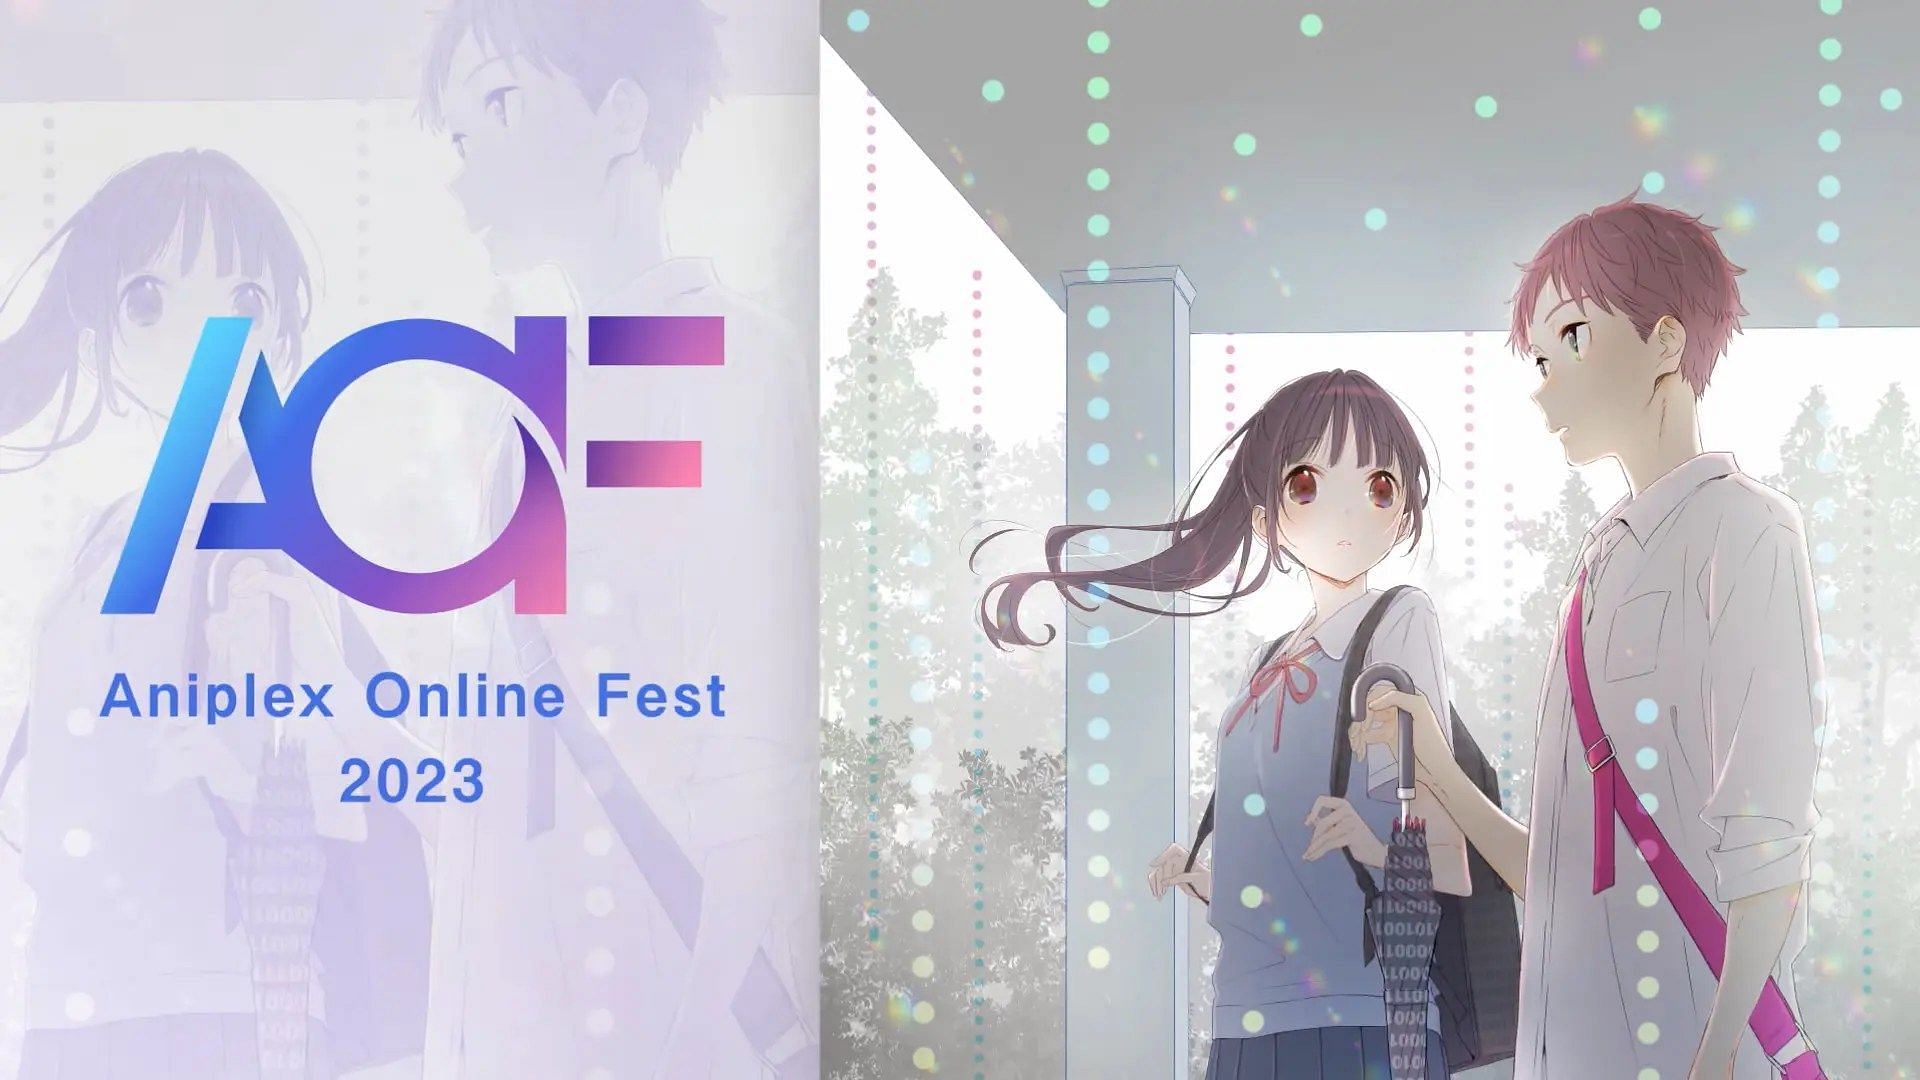 Solo Leveling, Blue Exorcist, Black Butler, and others to reveal new  information at Aniplex Online Fest 2023